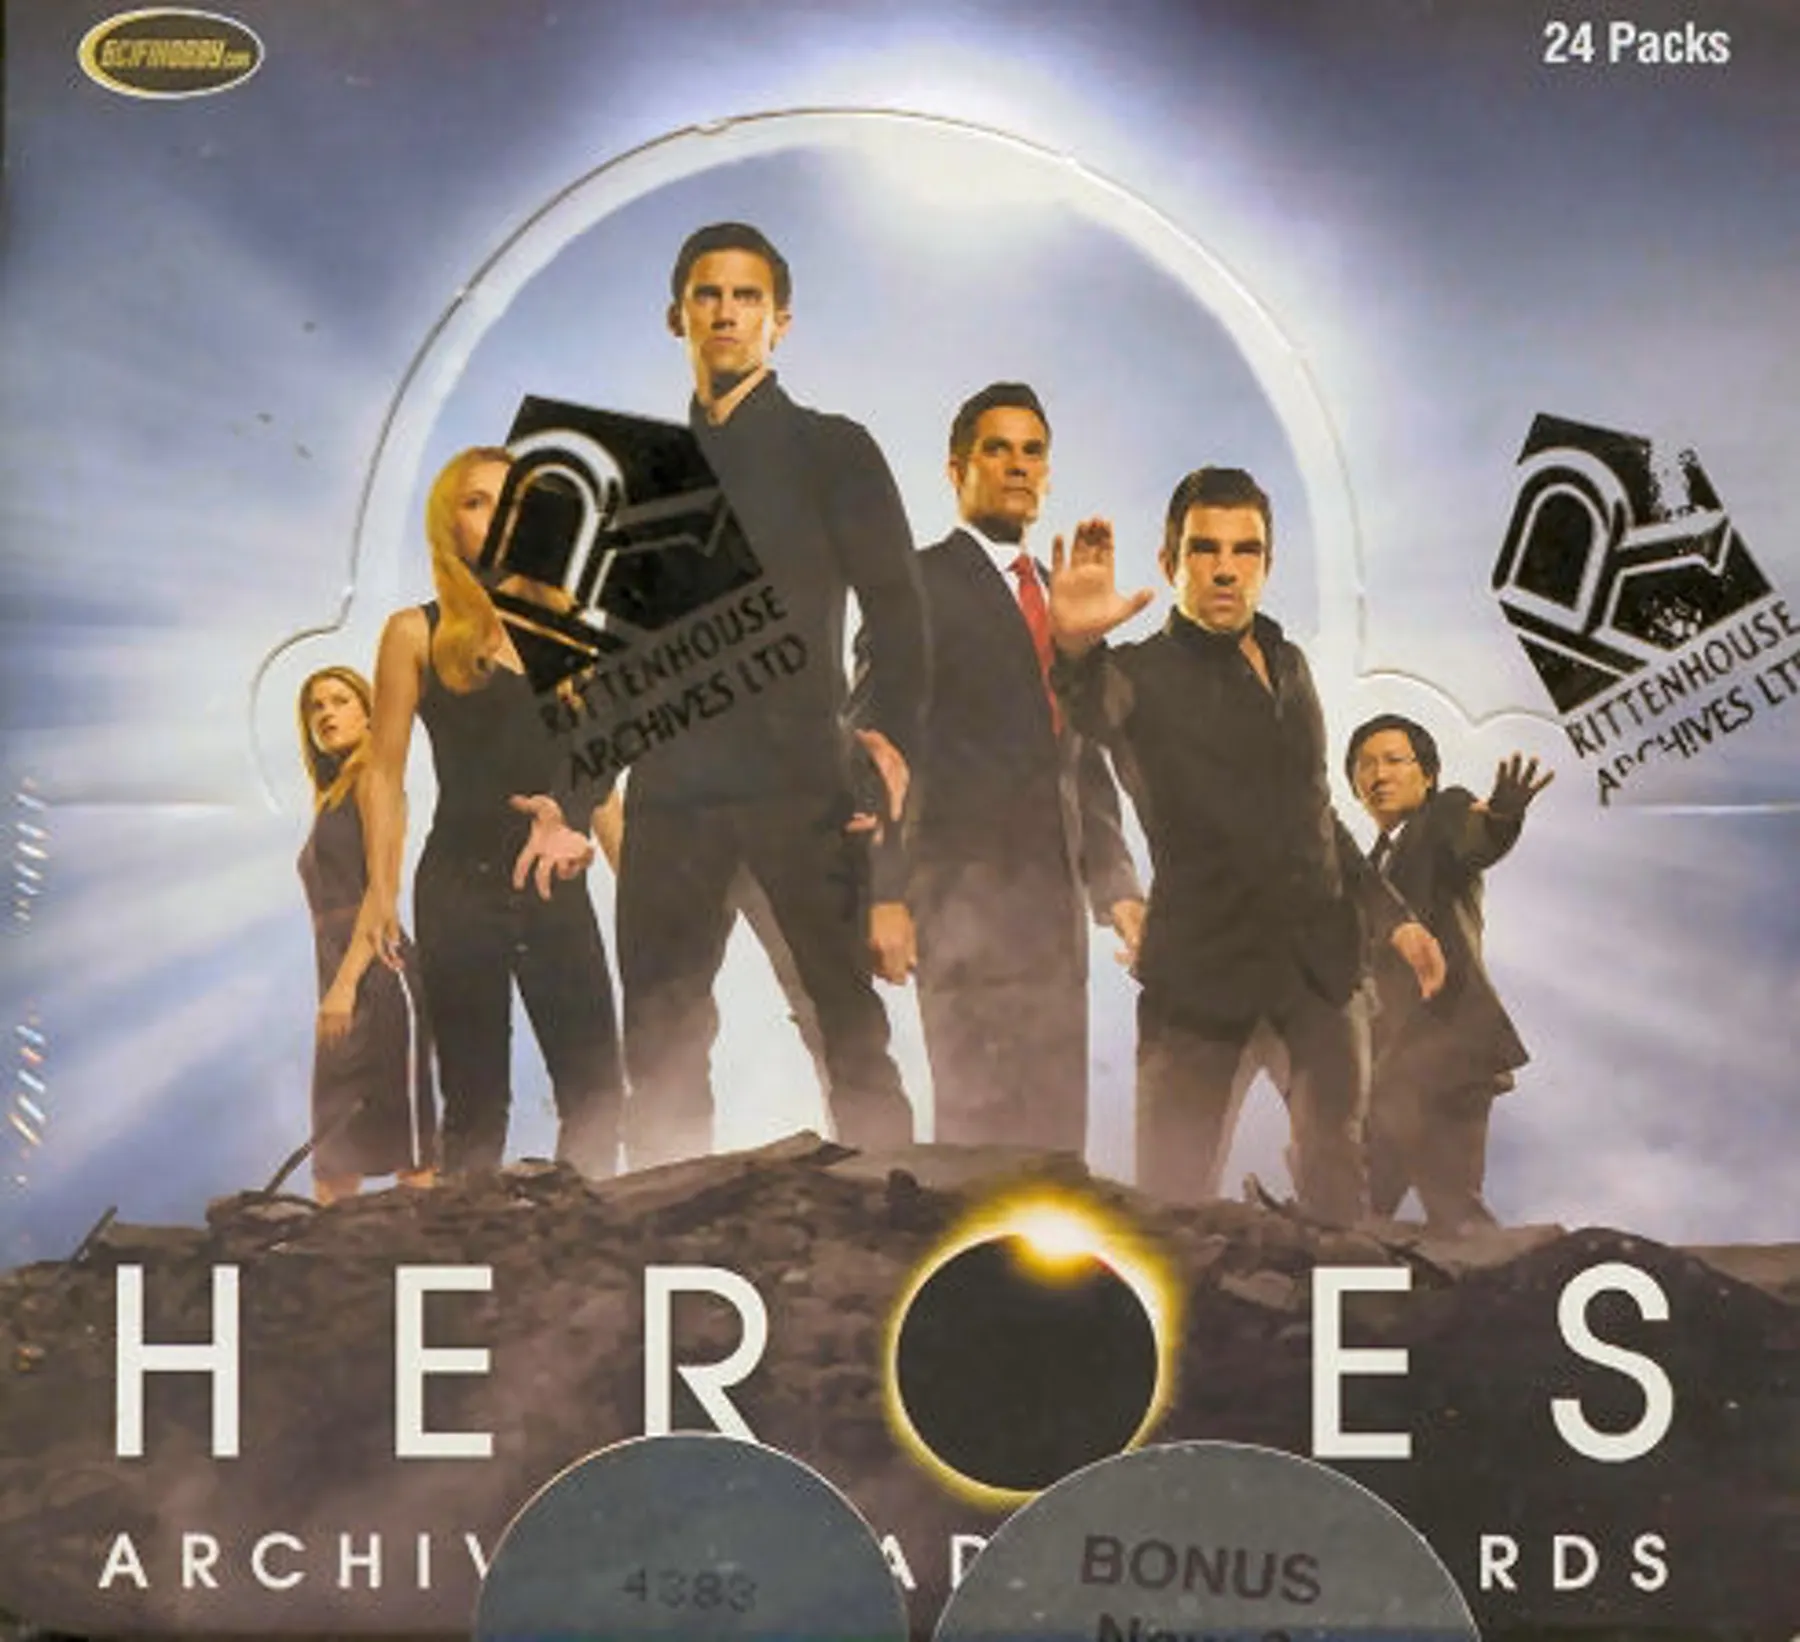 Rittenhouse Heroes Archives Trading Cards Box